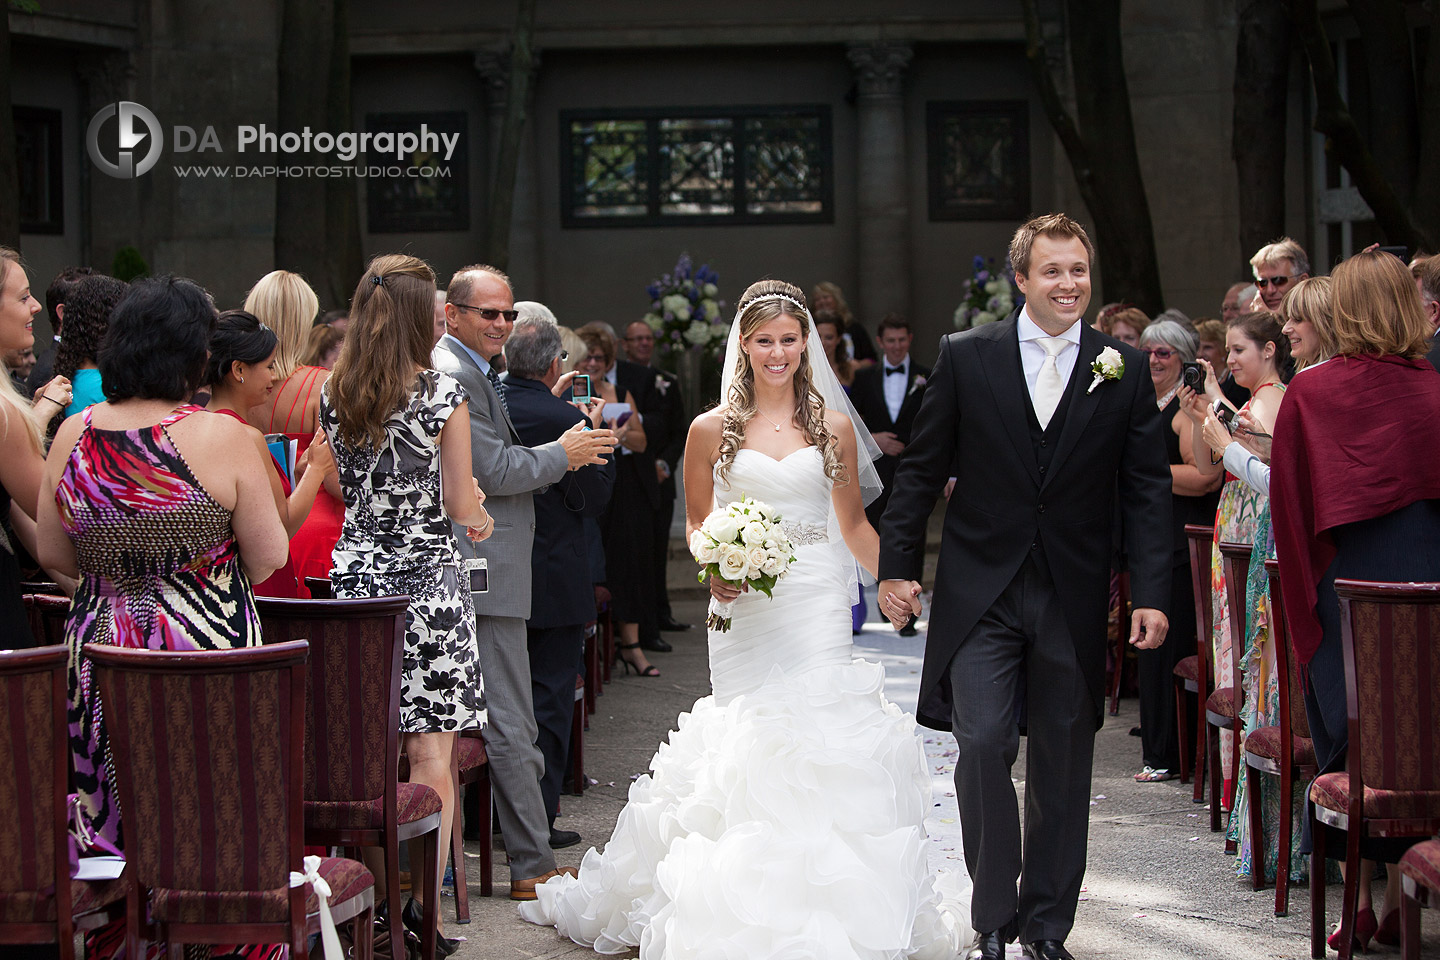 Bride and groom walking after the wedding ceremony - Wedding Photographer